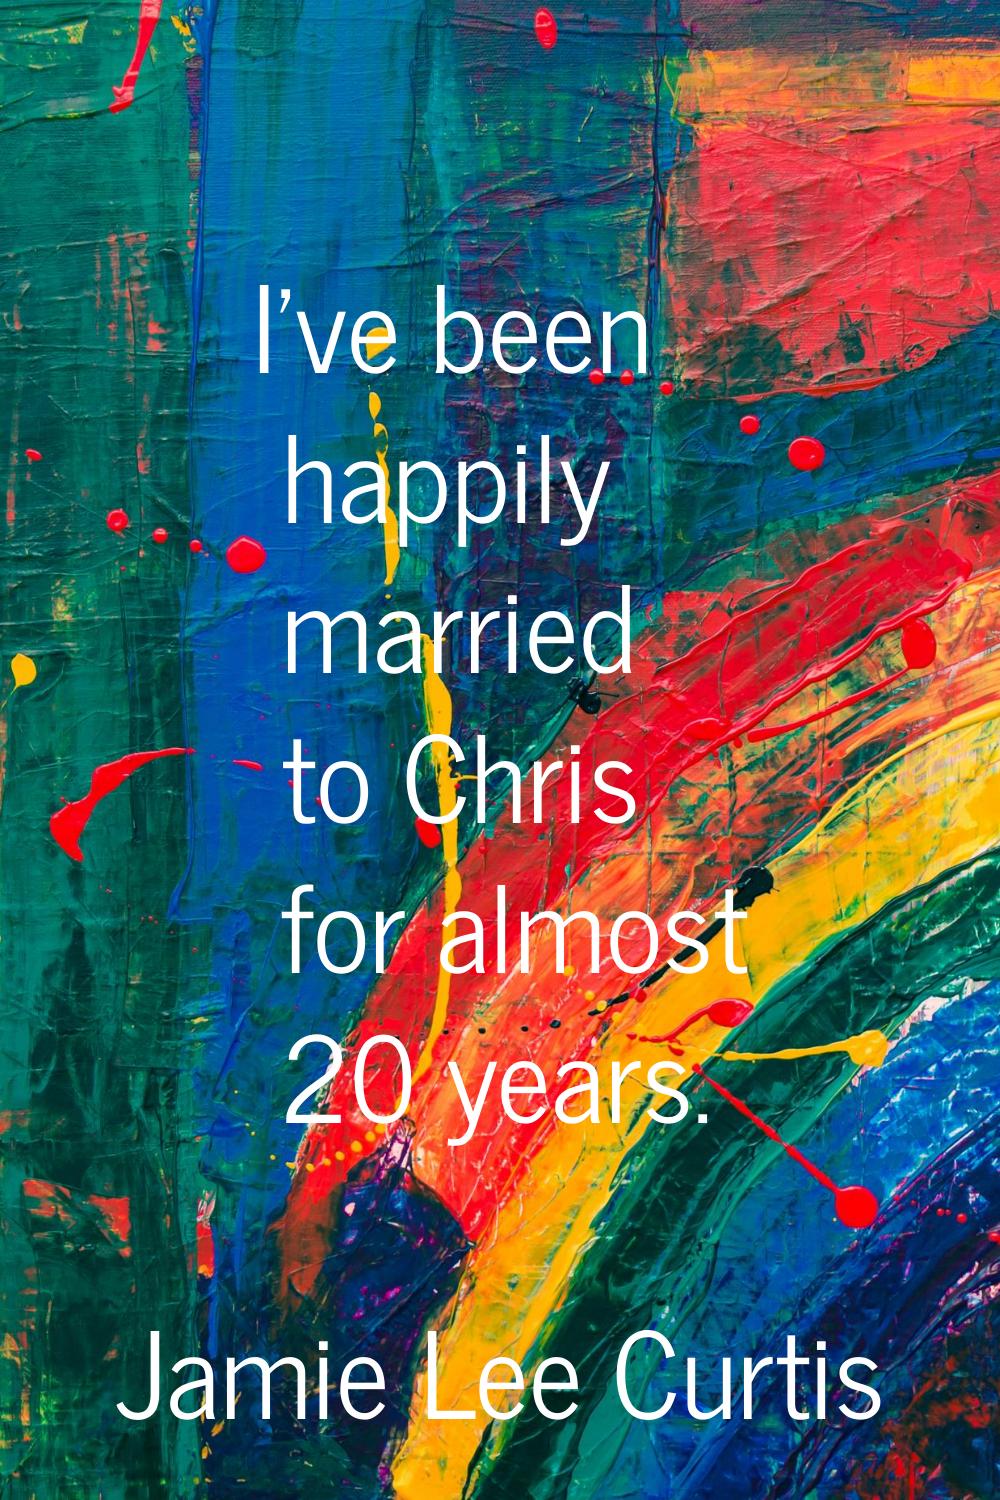 I've been happily married to Chris for almost 20 years.